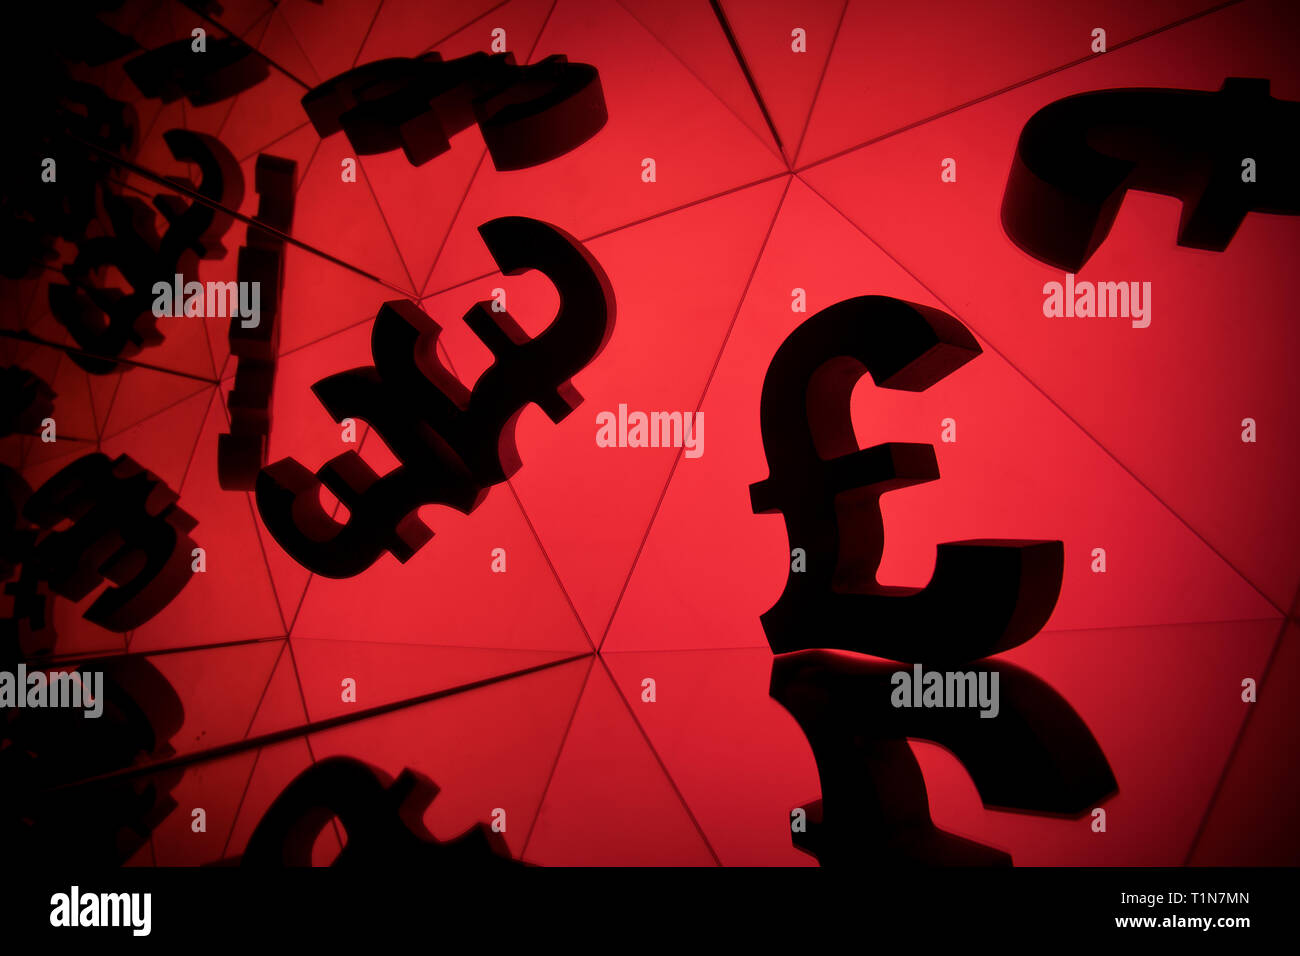 British Pound Sterling Currency Symbol With Many Mirroring Images of Itself on Red Background Stock Photo